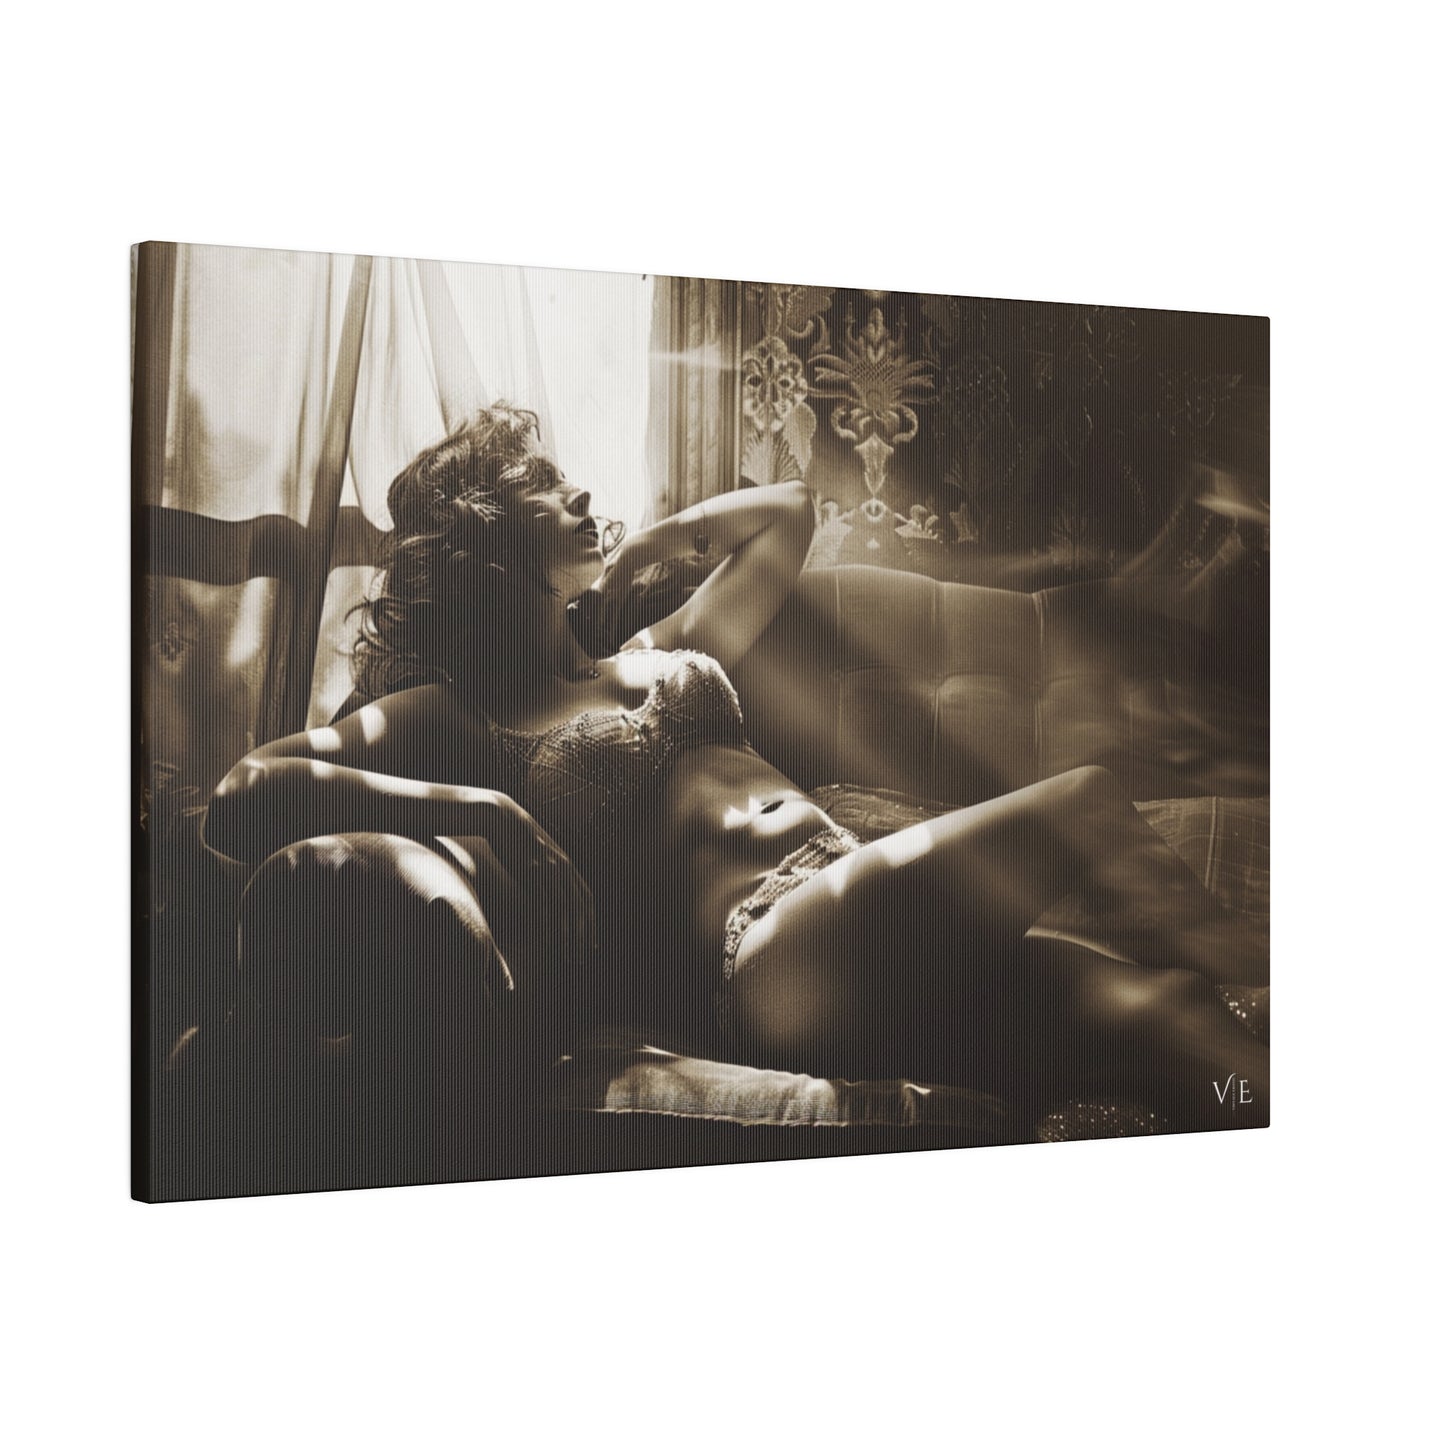 Vintage Erotic Beauty on a Couch - Erotic Art Canvas